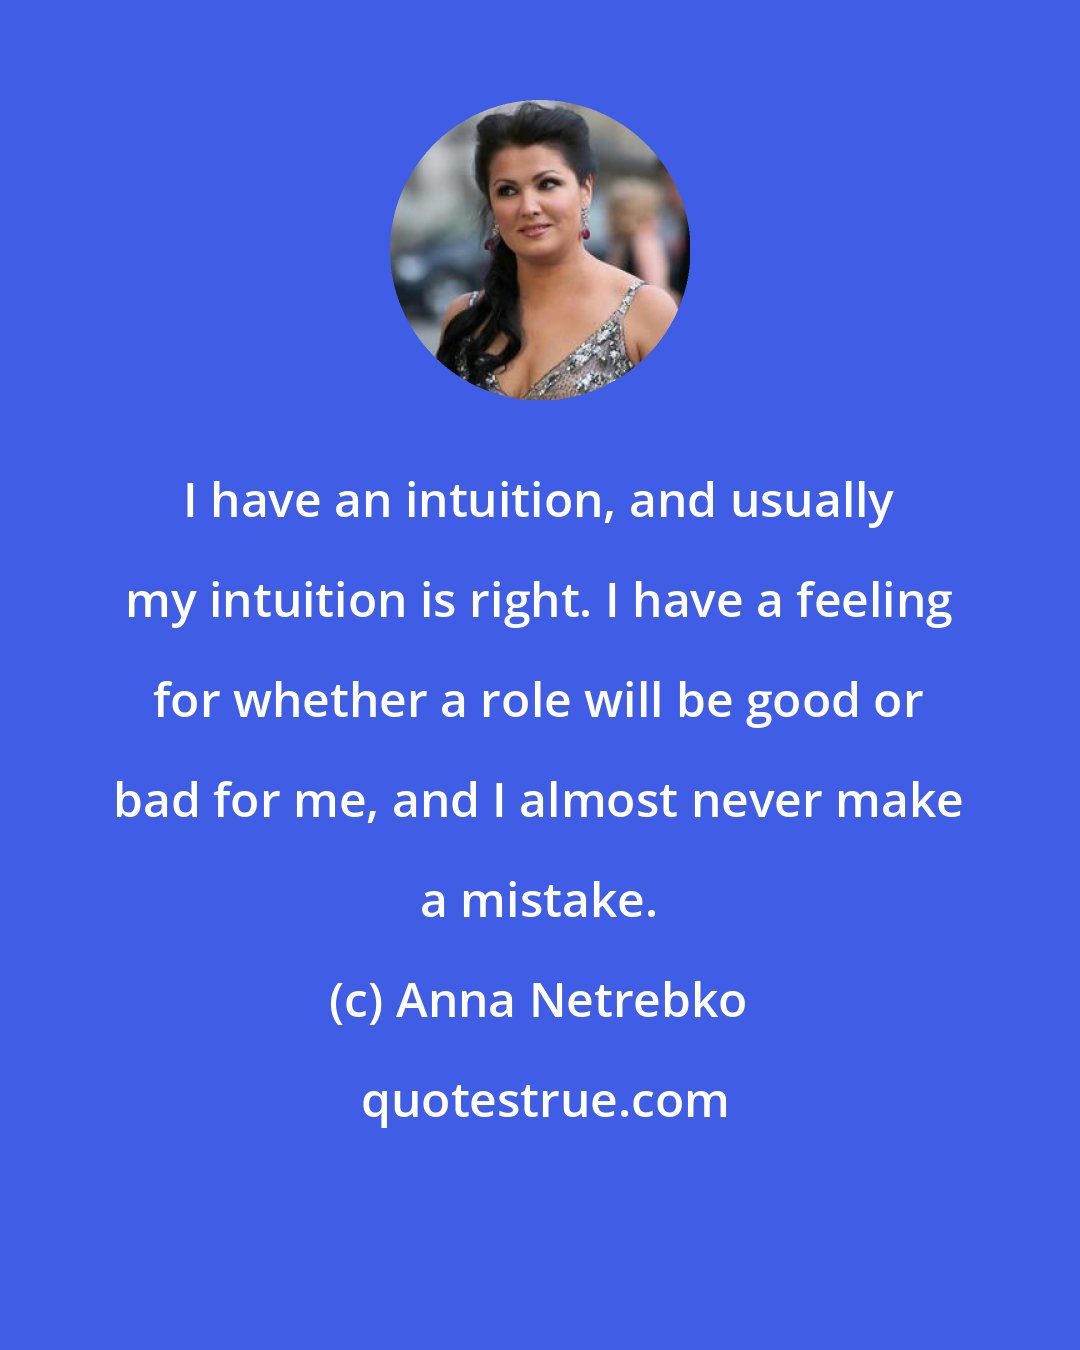 Anna Netrebko: I have an intuition, and usually my intuition is right. I have a feeling for whether a role will be good or bad for me, and I almost never make a mistake.